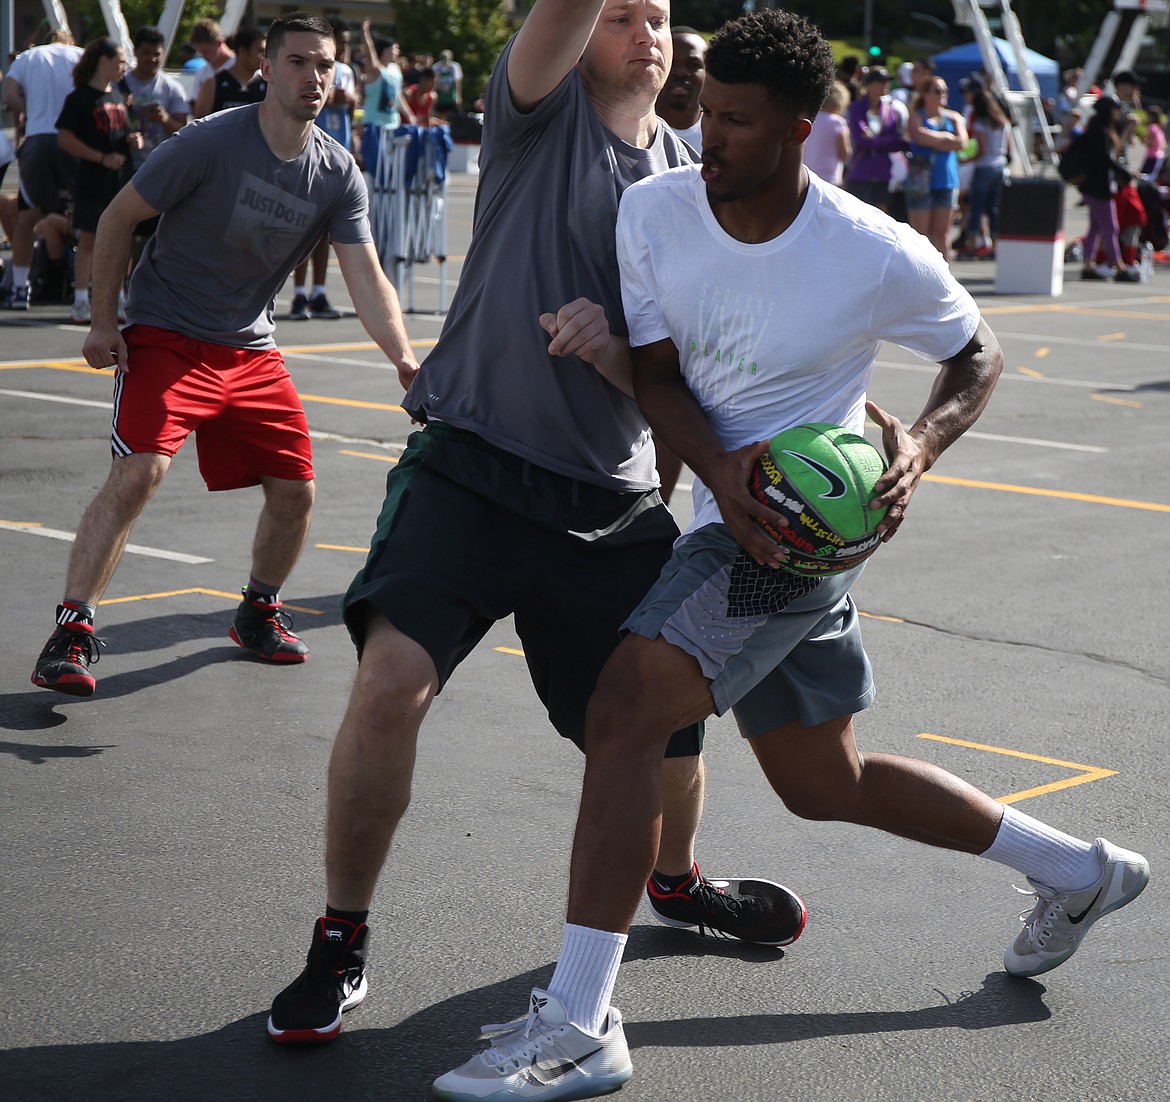 Deon Watson of Super Soakers drives to the basket during an opening-round game at Hoopfest on Saturday in the Spokane Arena parking lot.